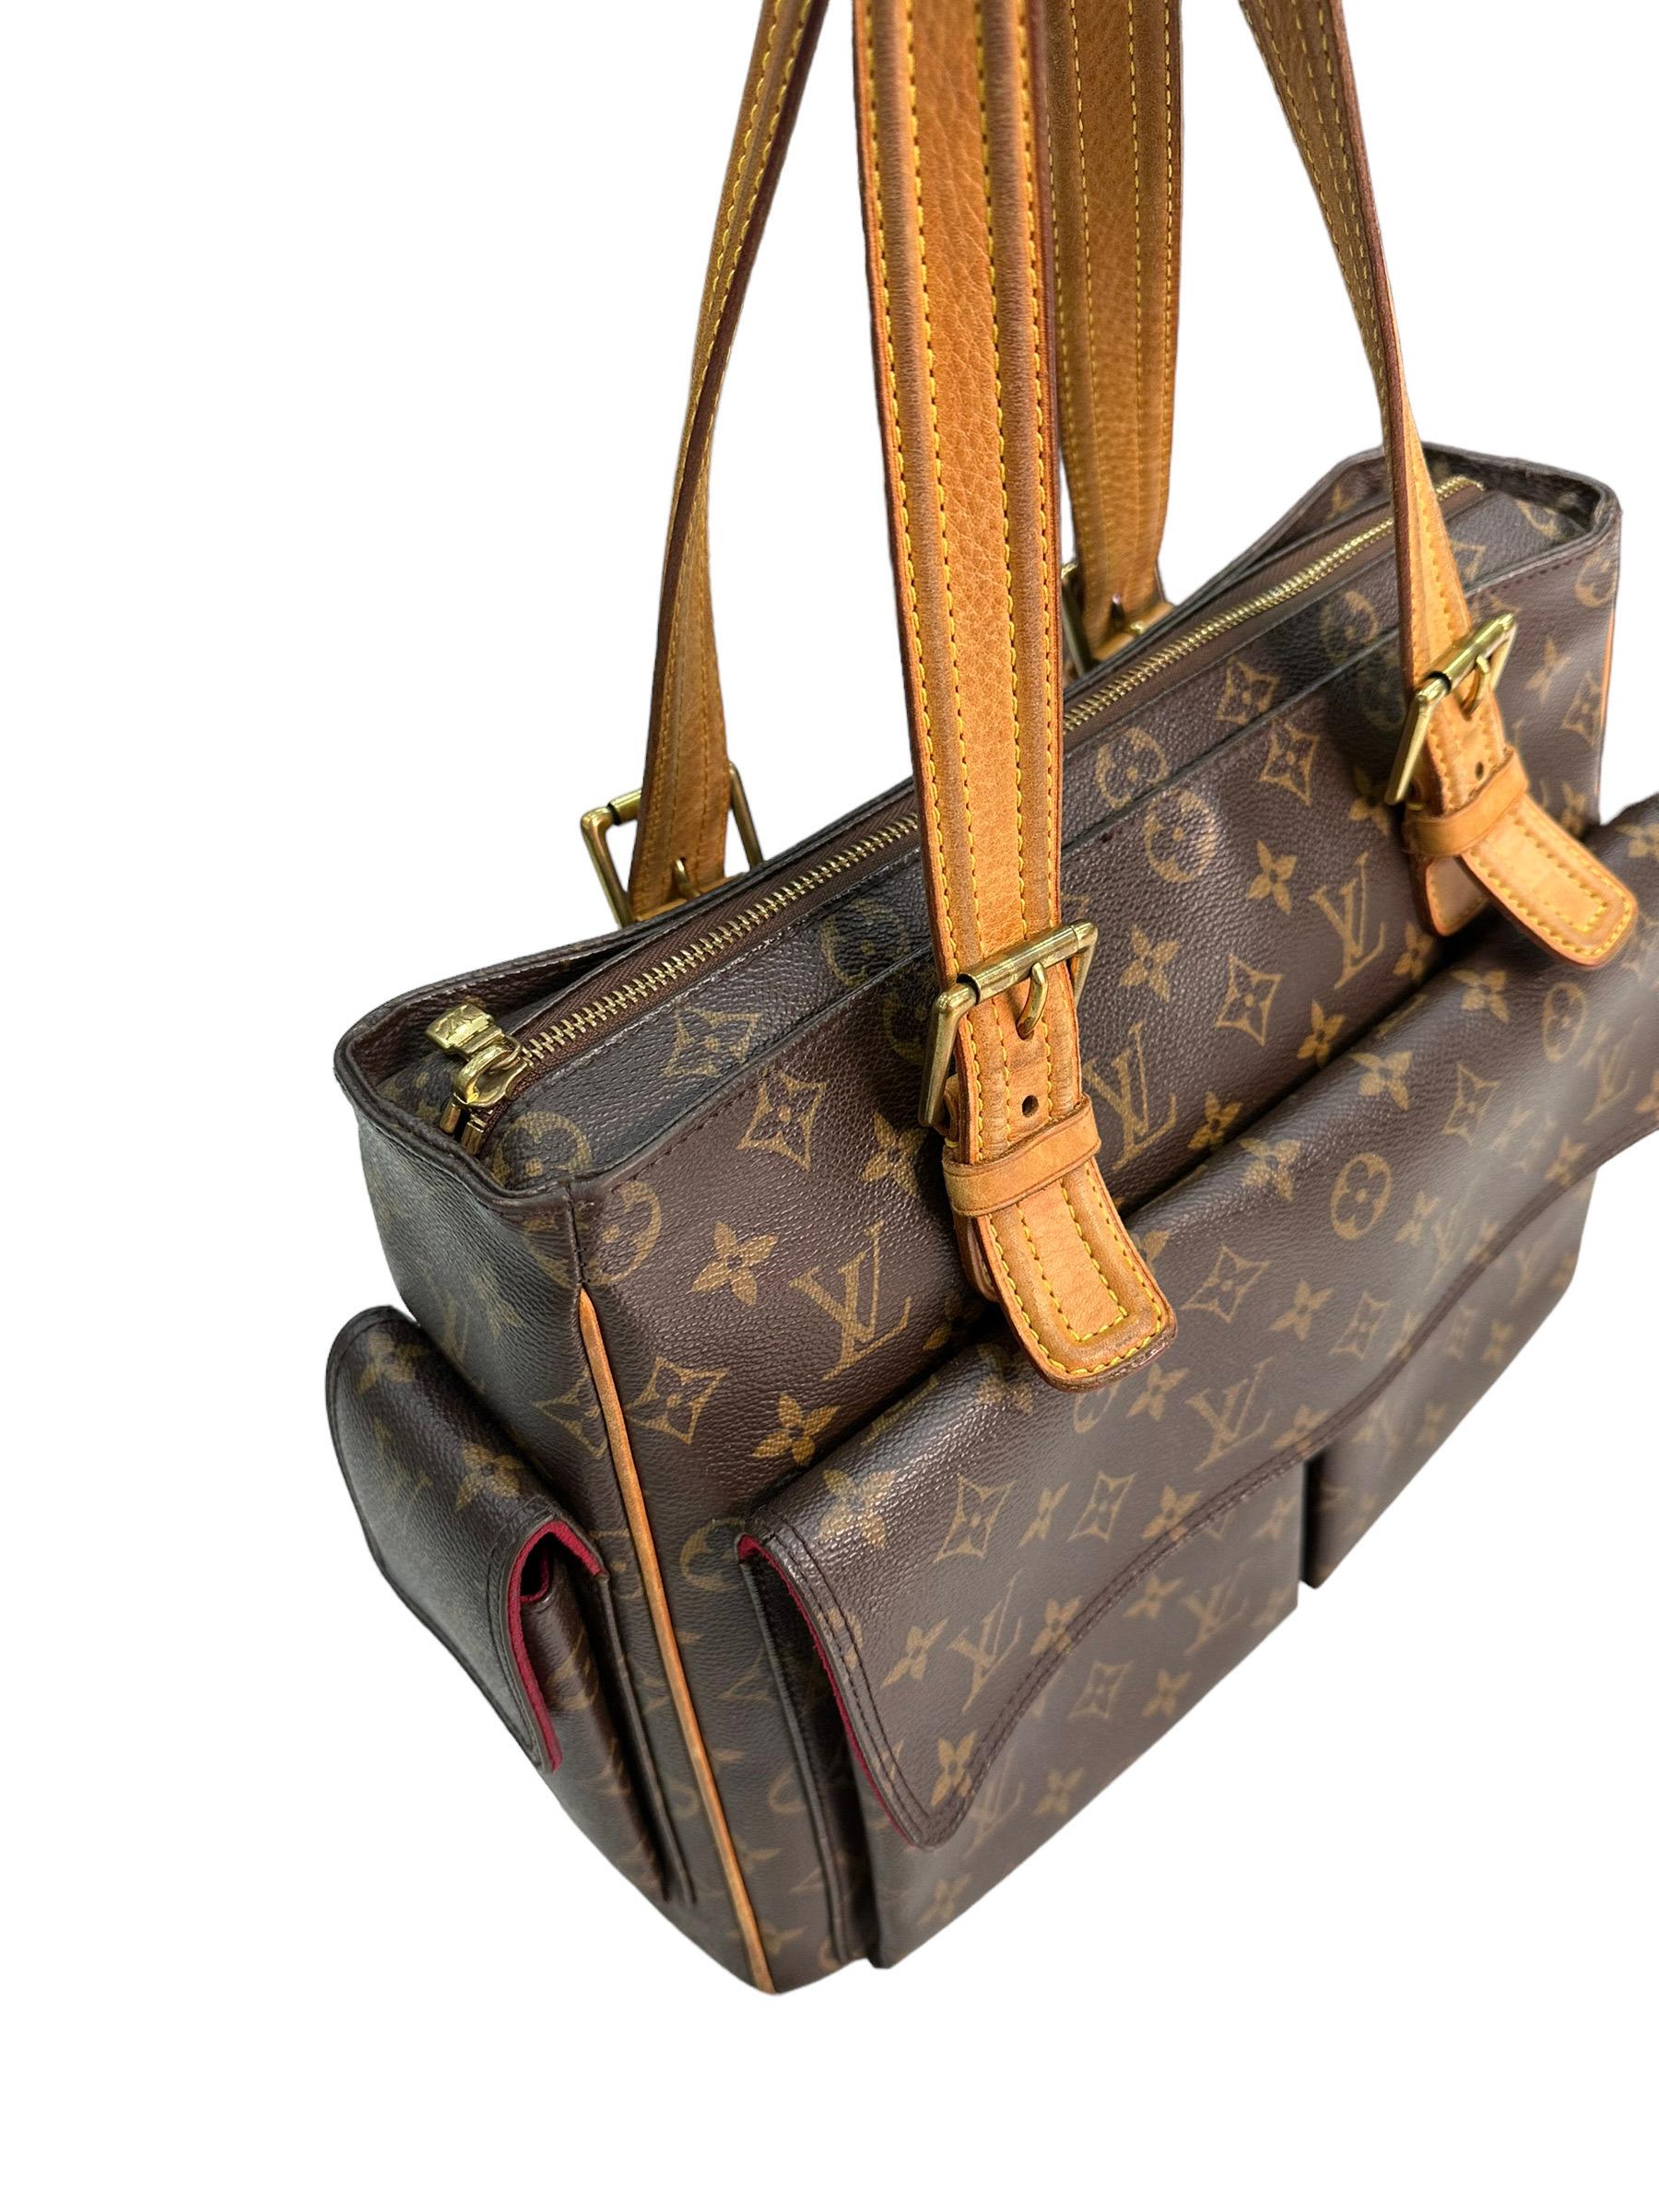 Louis Vuitton signed bag, Multipli Cite model, size GM, made of brown canvas in the classic Monogram pattern with cowhide inserts and golden hardware. Equipped with an upper zip closure, a side pocket with magnetic button closure, and two front